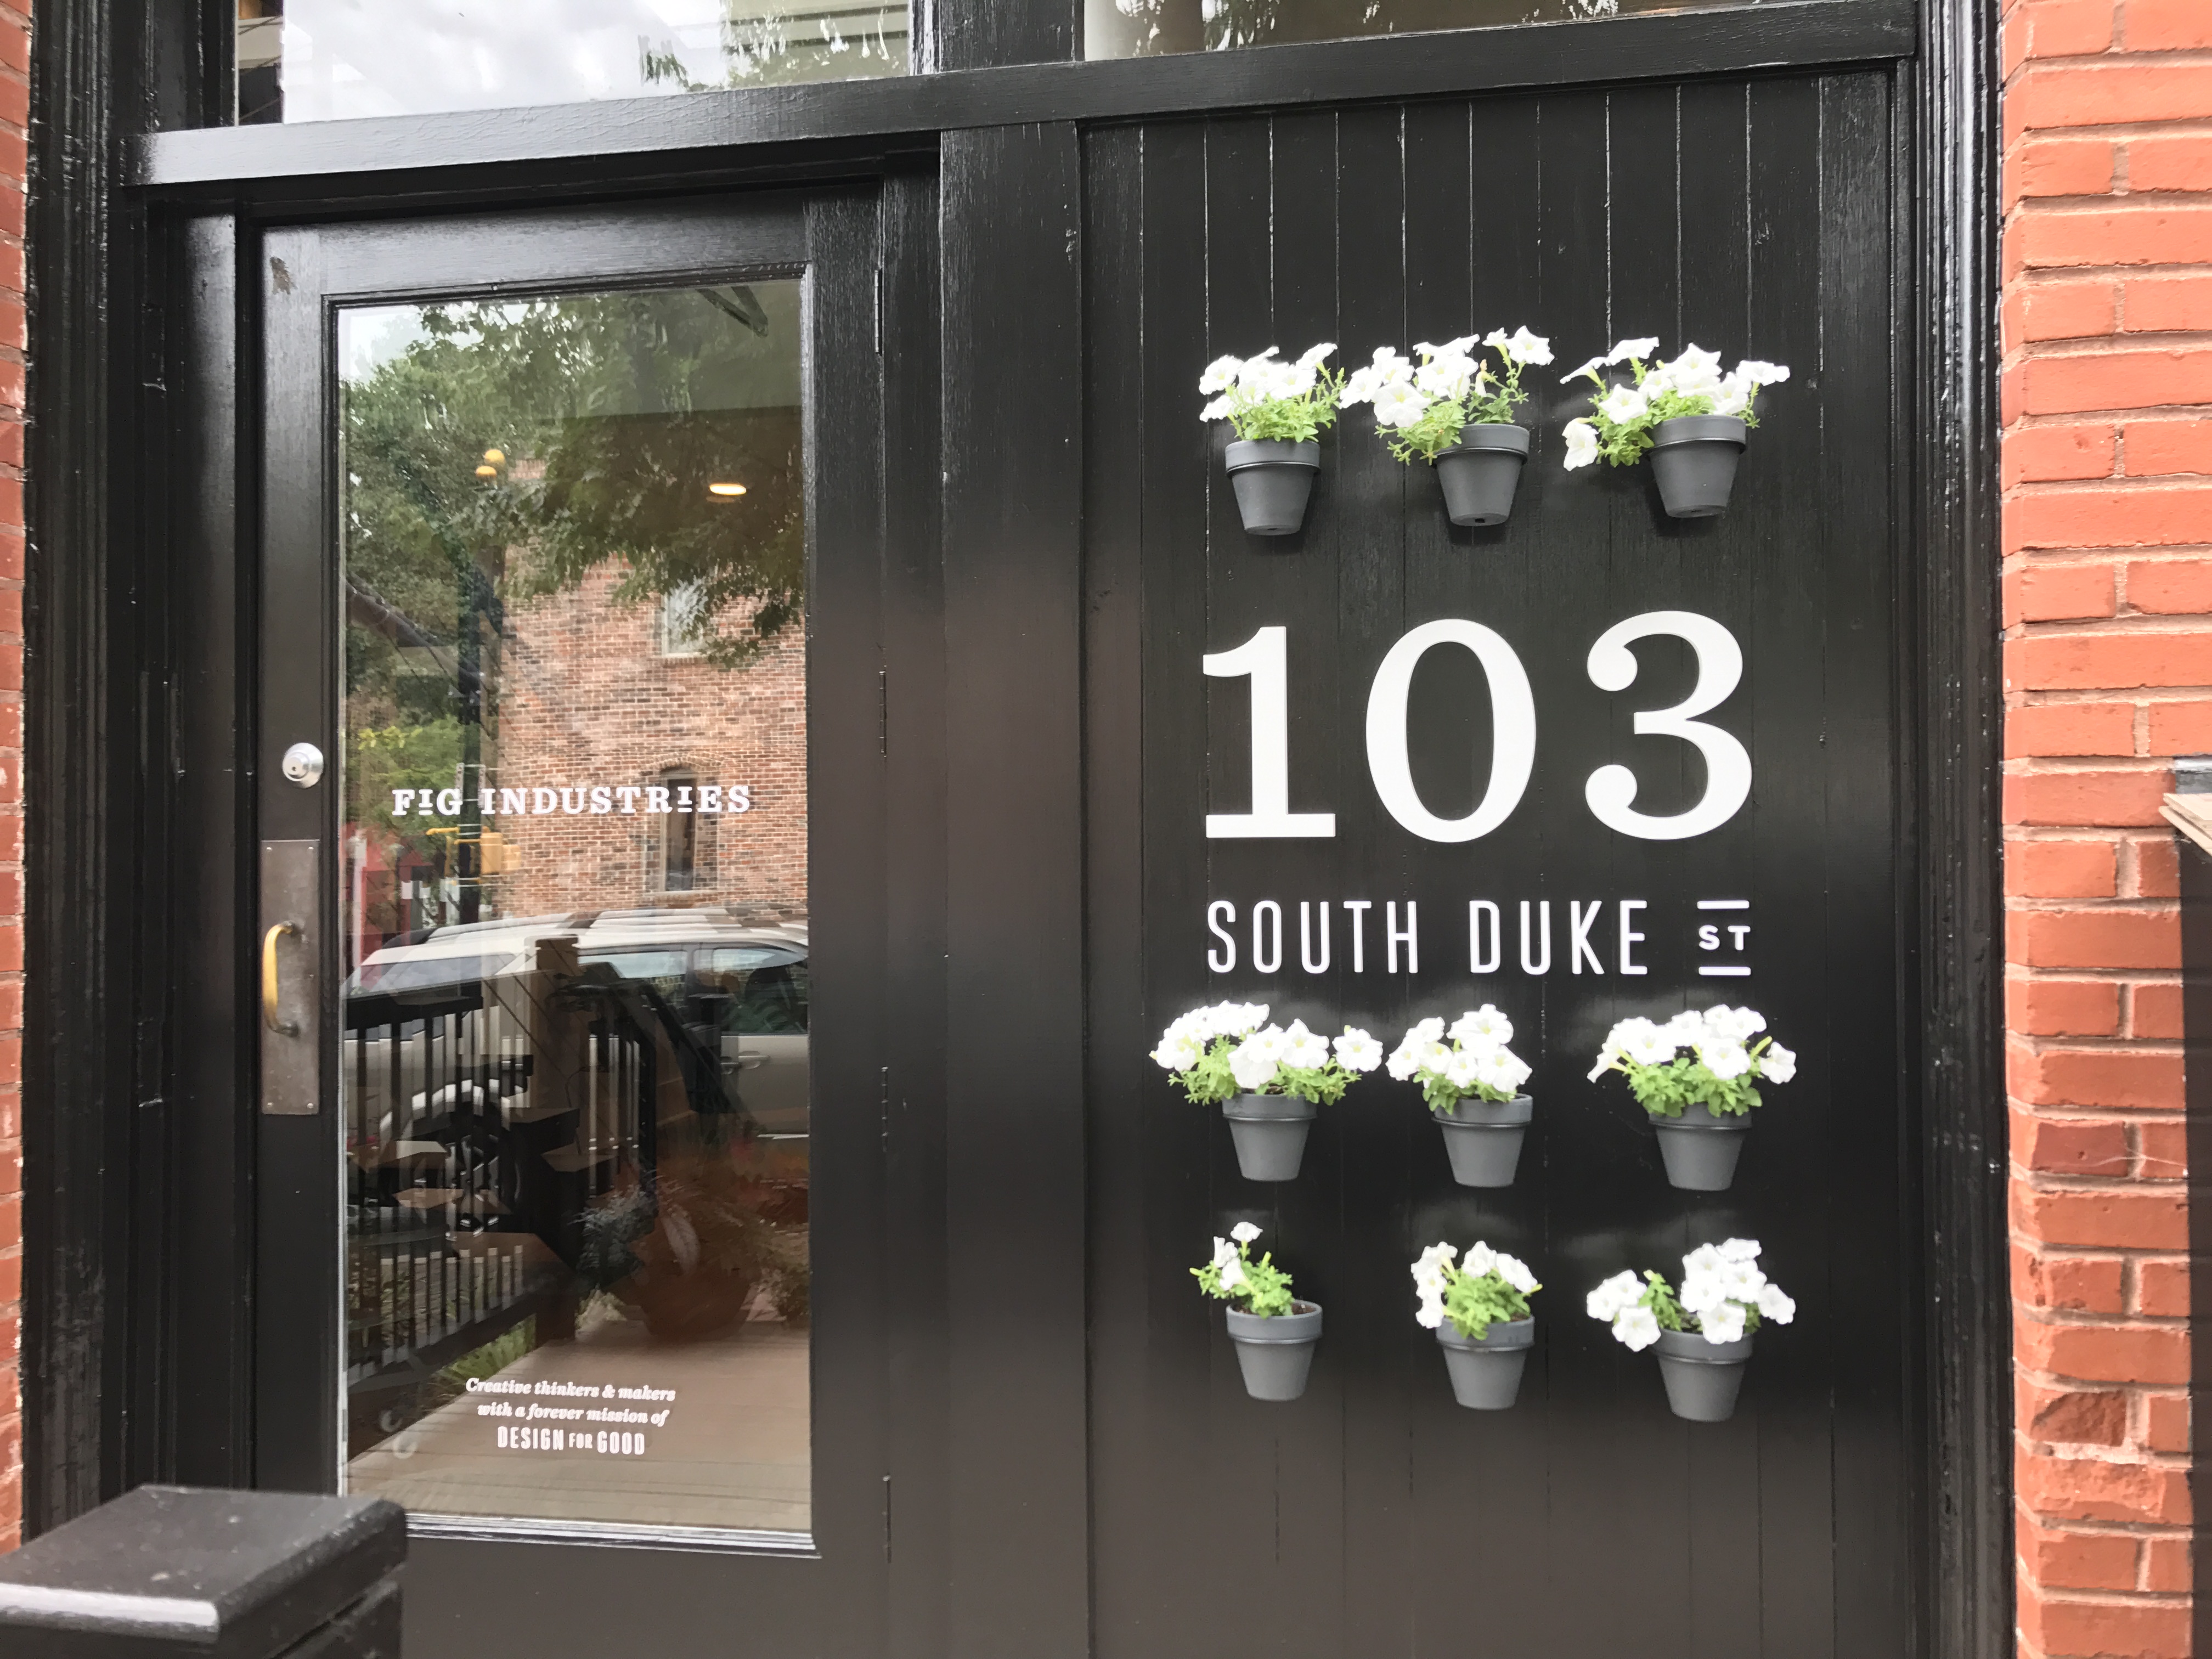 An image with an outdoor business address sign that has flowerpots around it